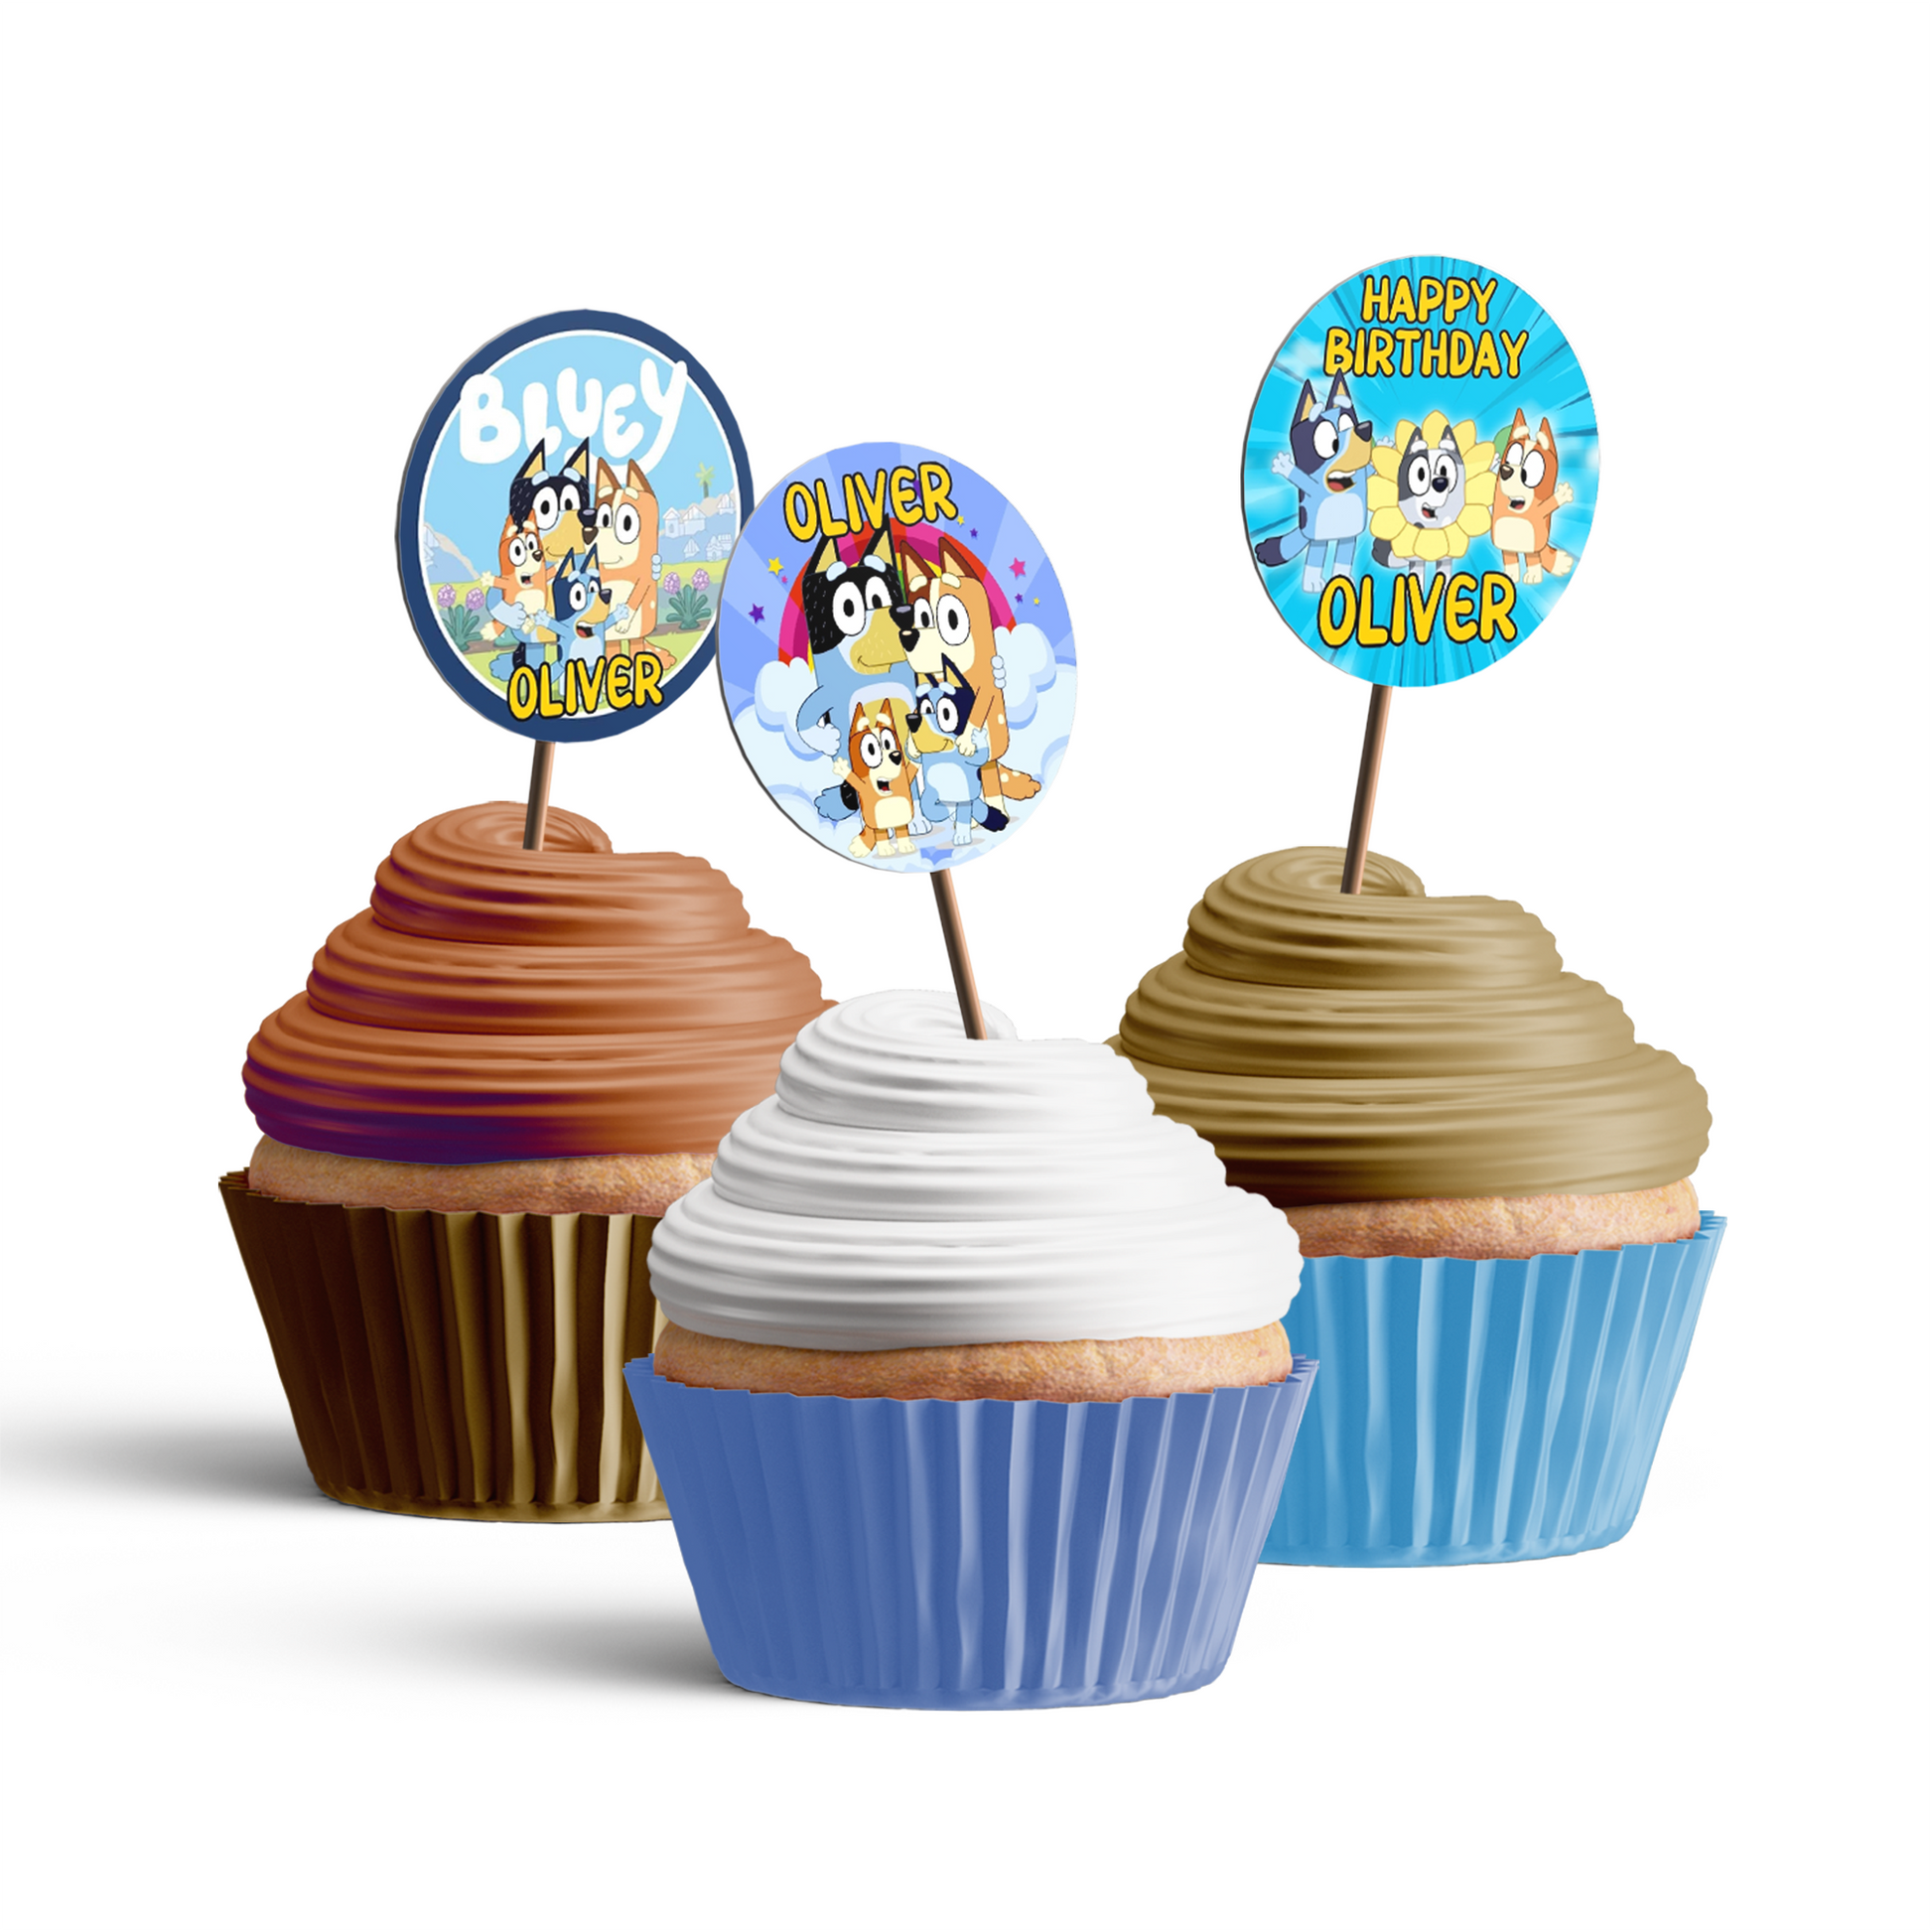 Bluey Personalized Cupcakes Toppers, the perfect finishing touch